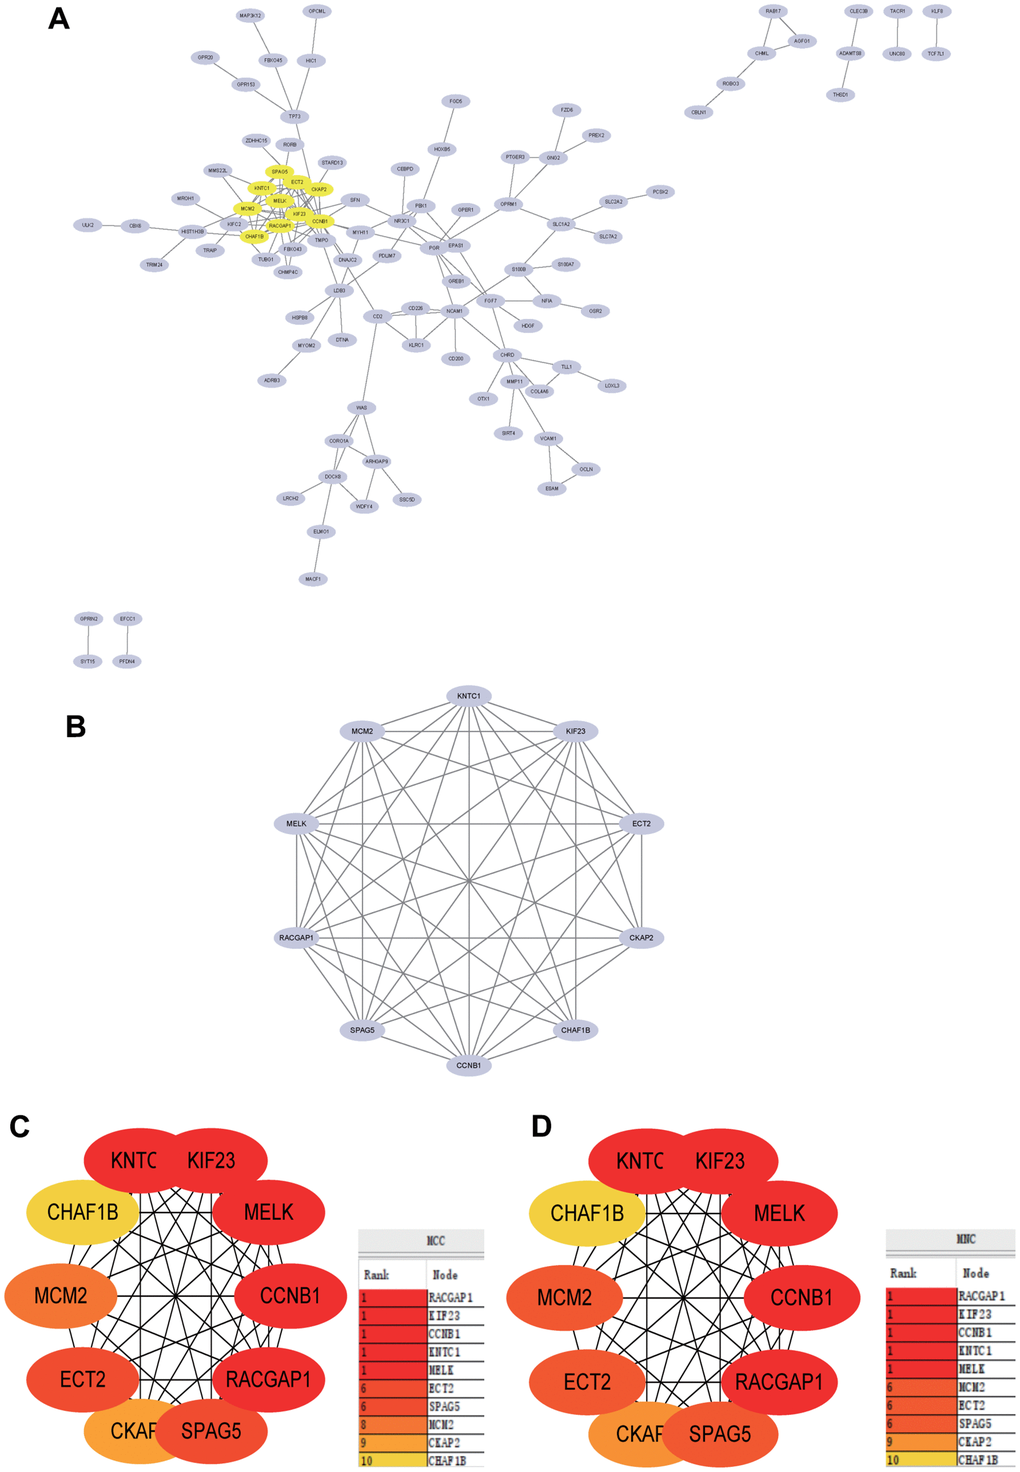 Construction and analysis of protein-protein interaction (PPI) network. (A) PPI network. (B) The core gene cluster. (C) MCC was used to identify central genes. (D) MNC was used to identify central genes.